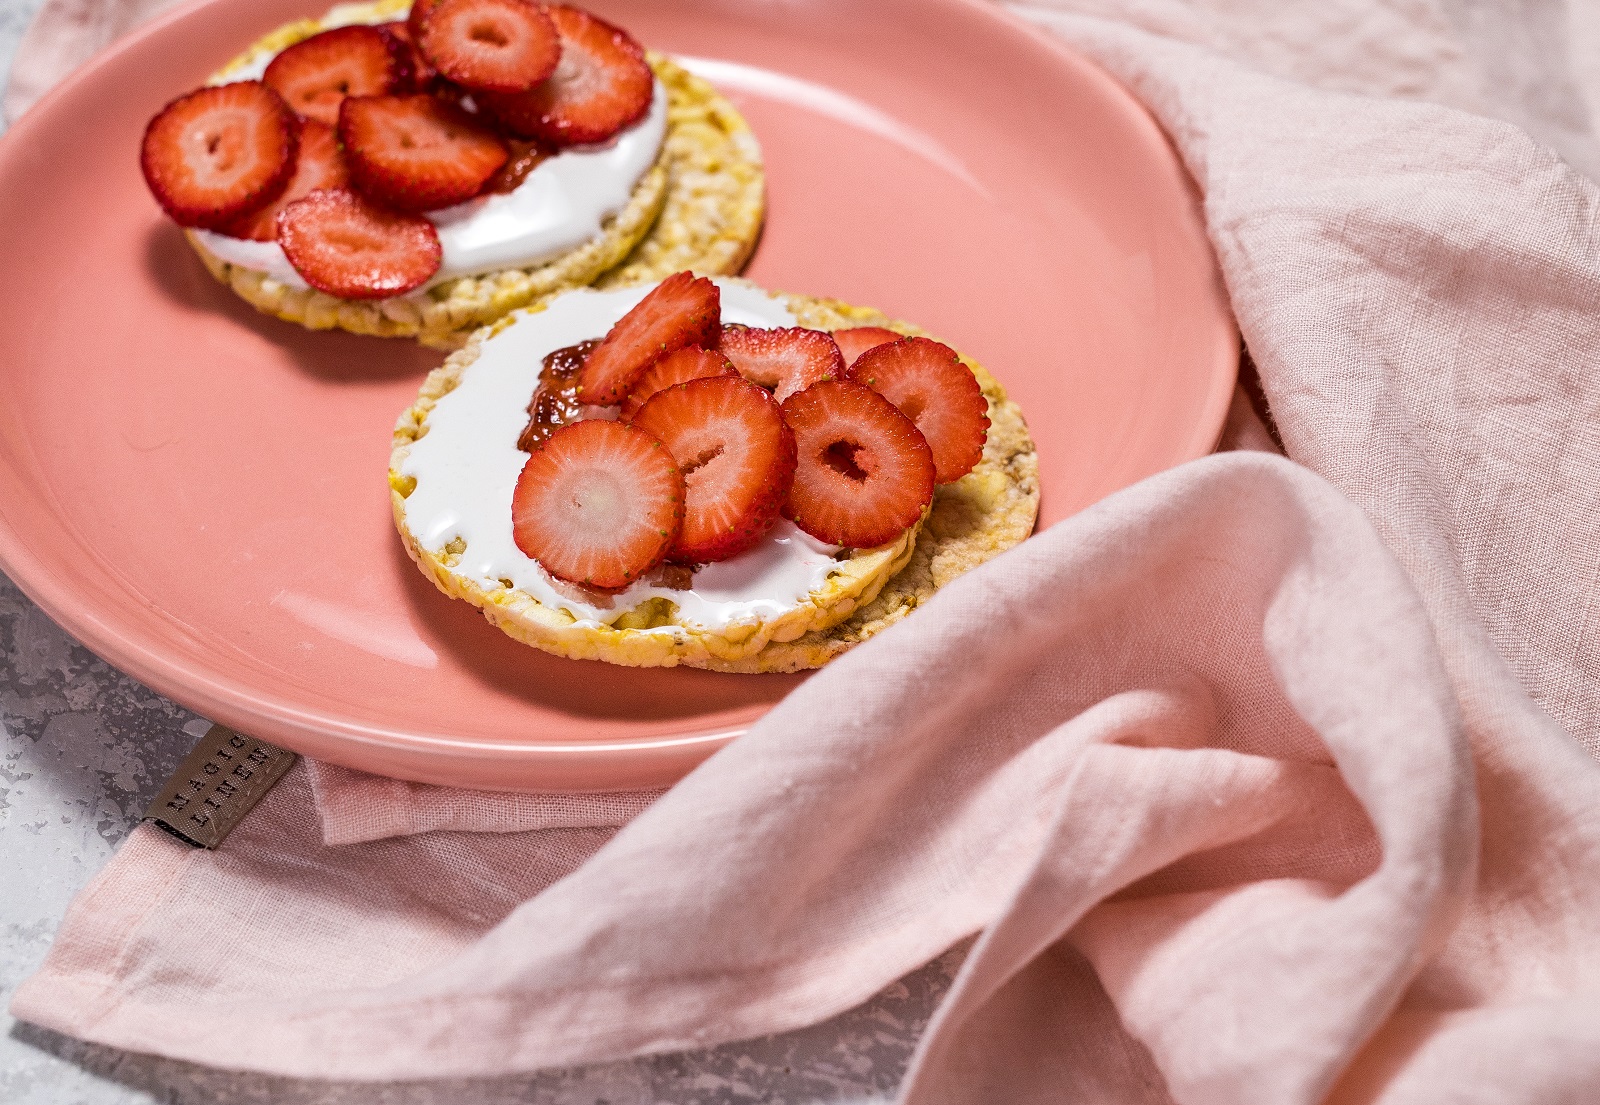 Sweet snack of marshmallow spread & strawberries on CORN THINS slices